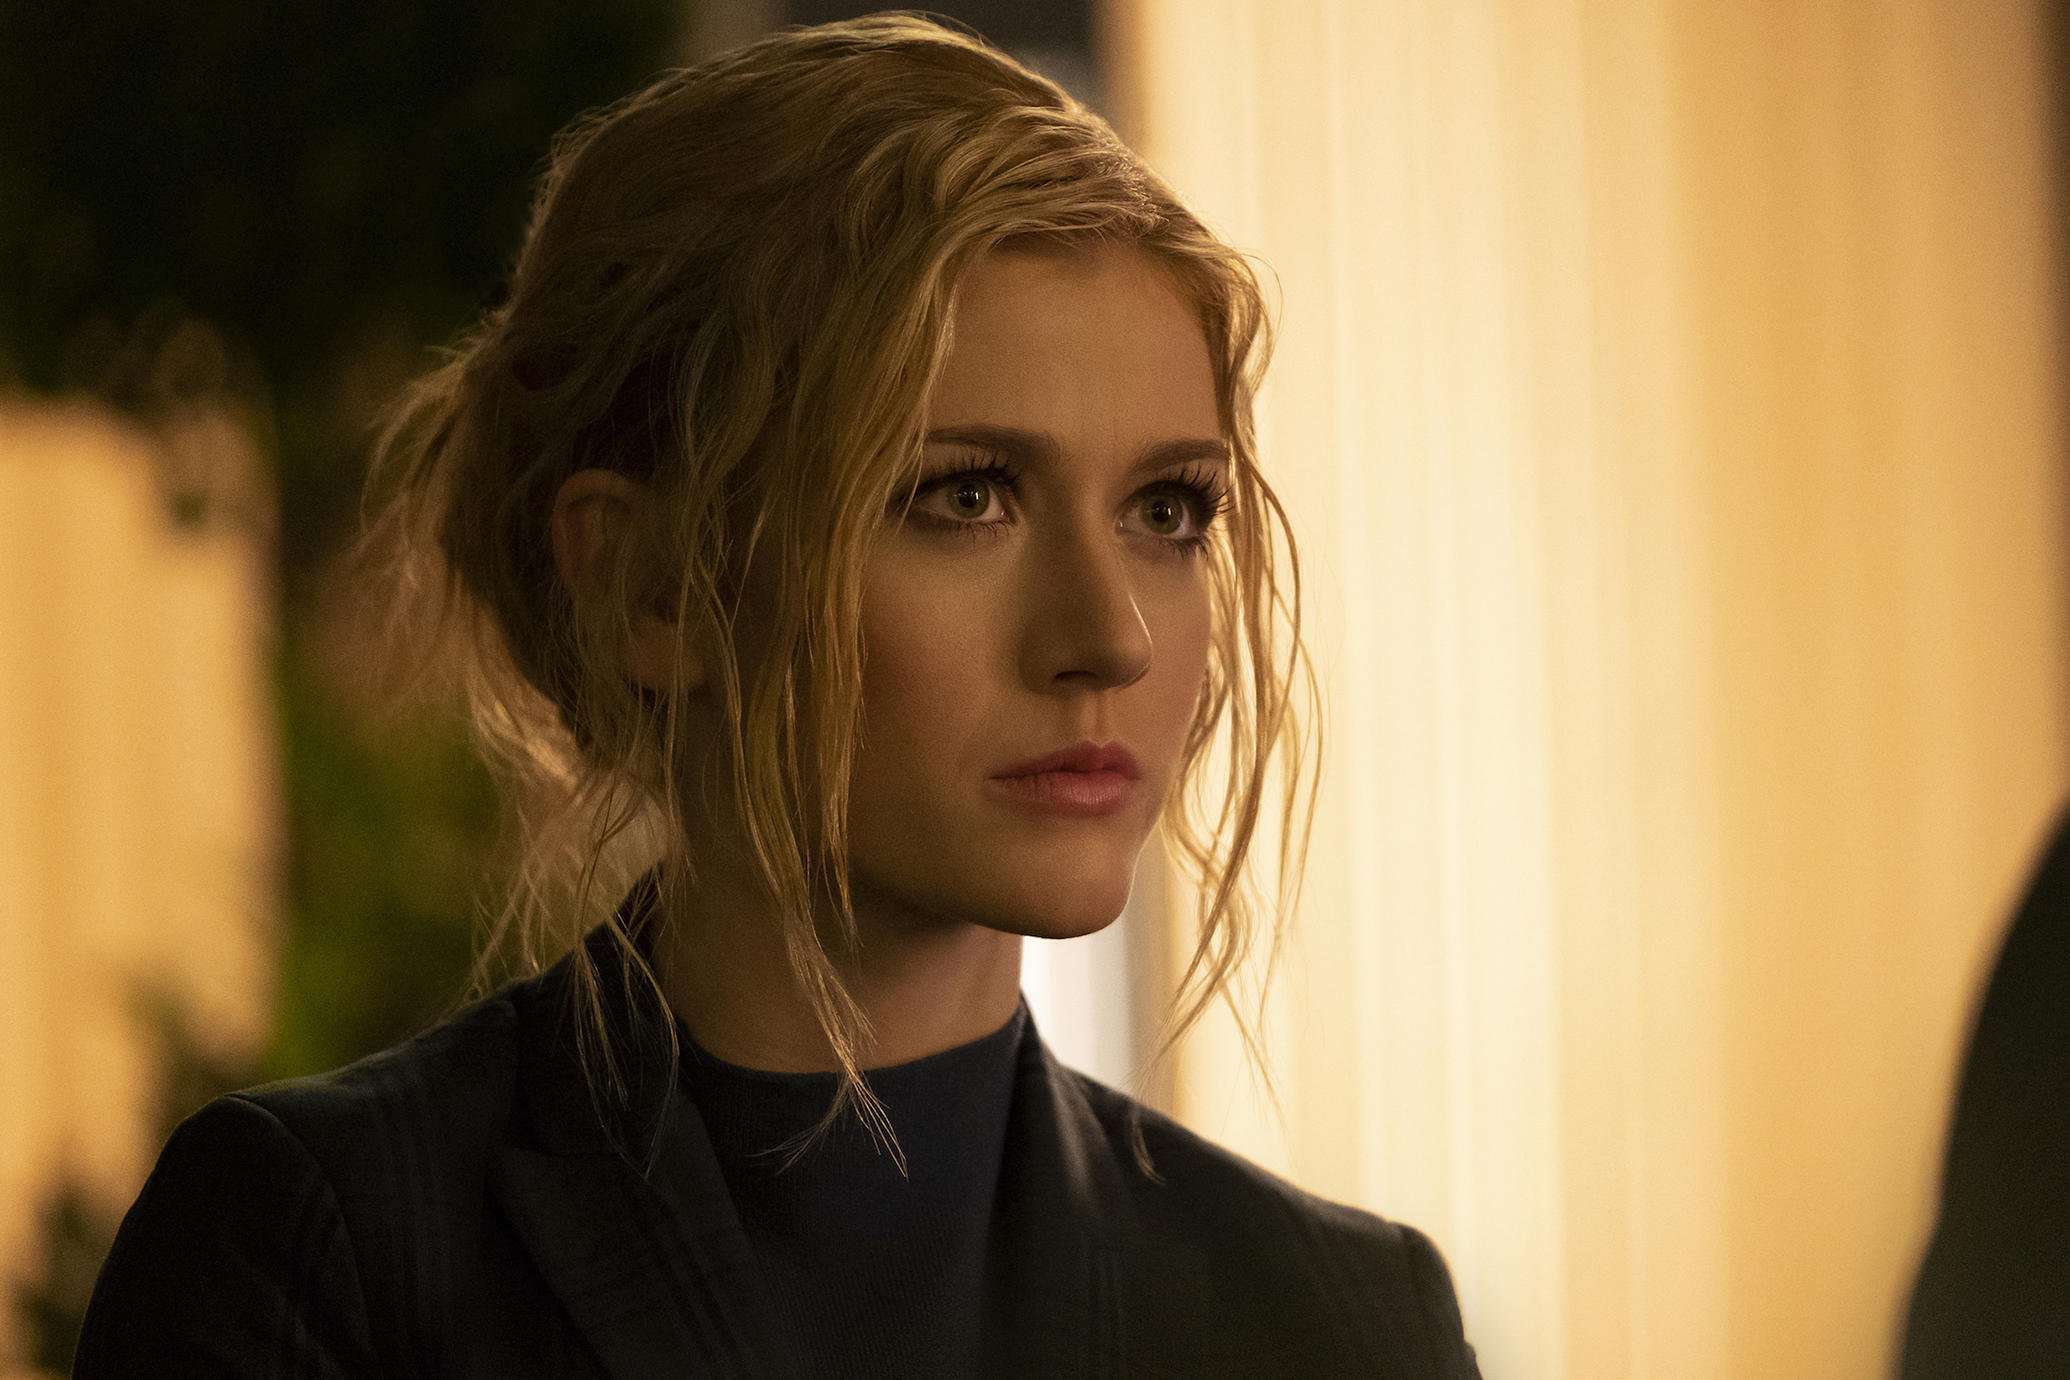 Arrow -- "Star City 2040" -- Image Number: AR716b_0136r -- Pictured: Katherine McNamara as Mia/Blackstar -- Photo: Katie Yu/The CW -- © 2019 The CW Network, LLC. All Rights Reserved.